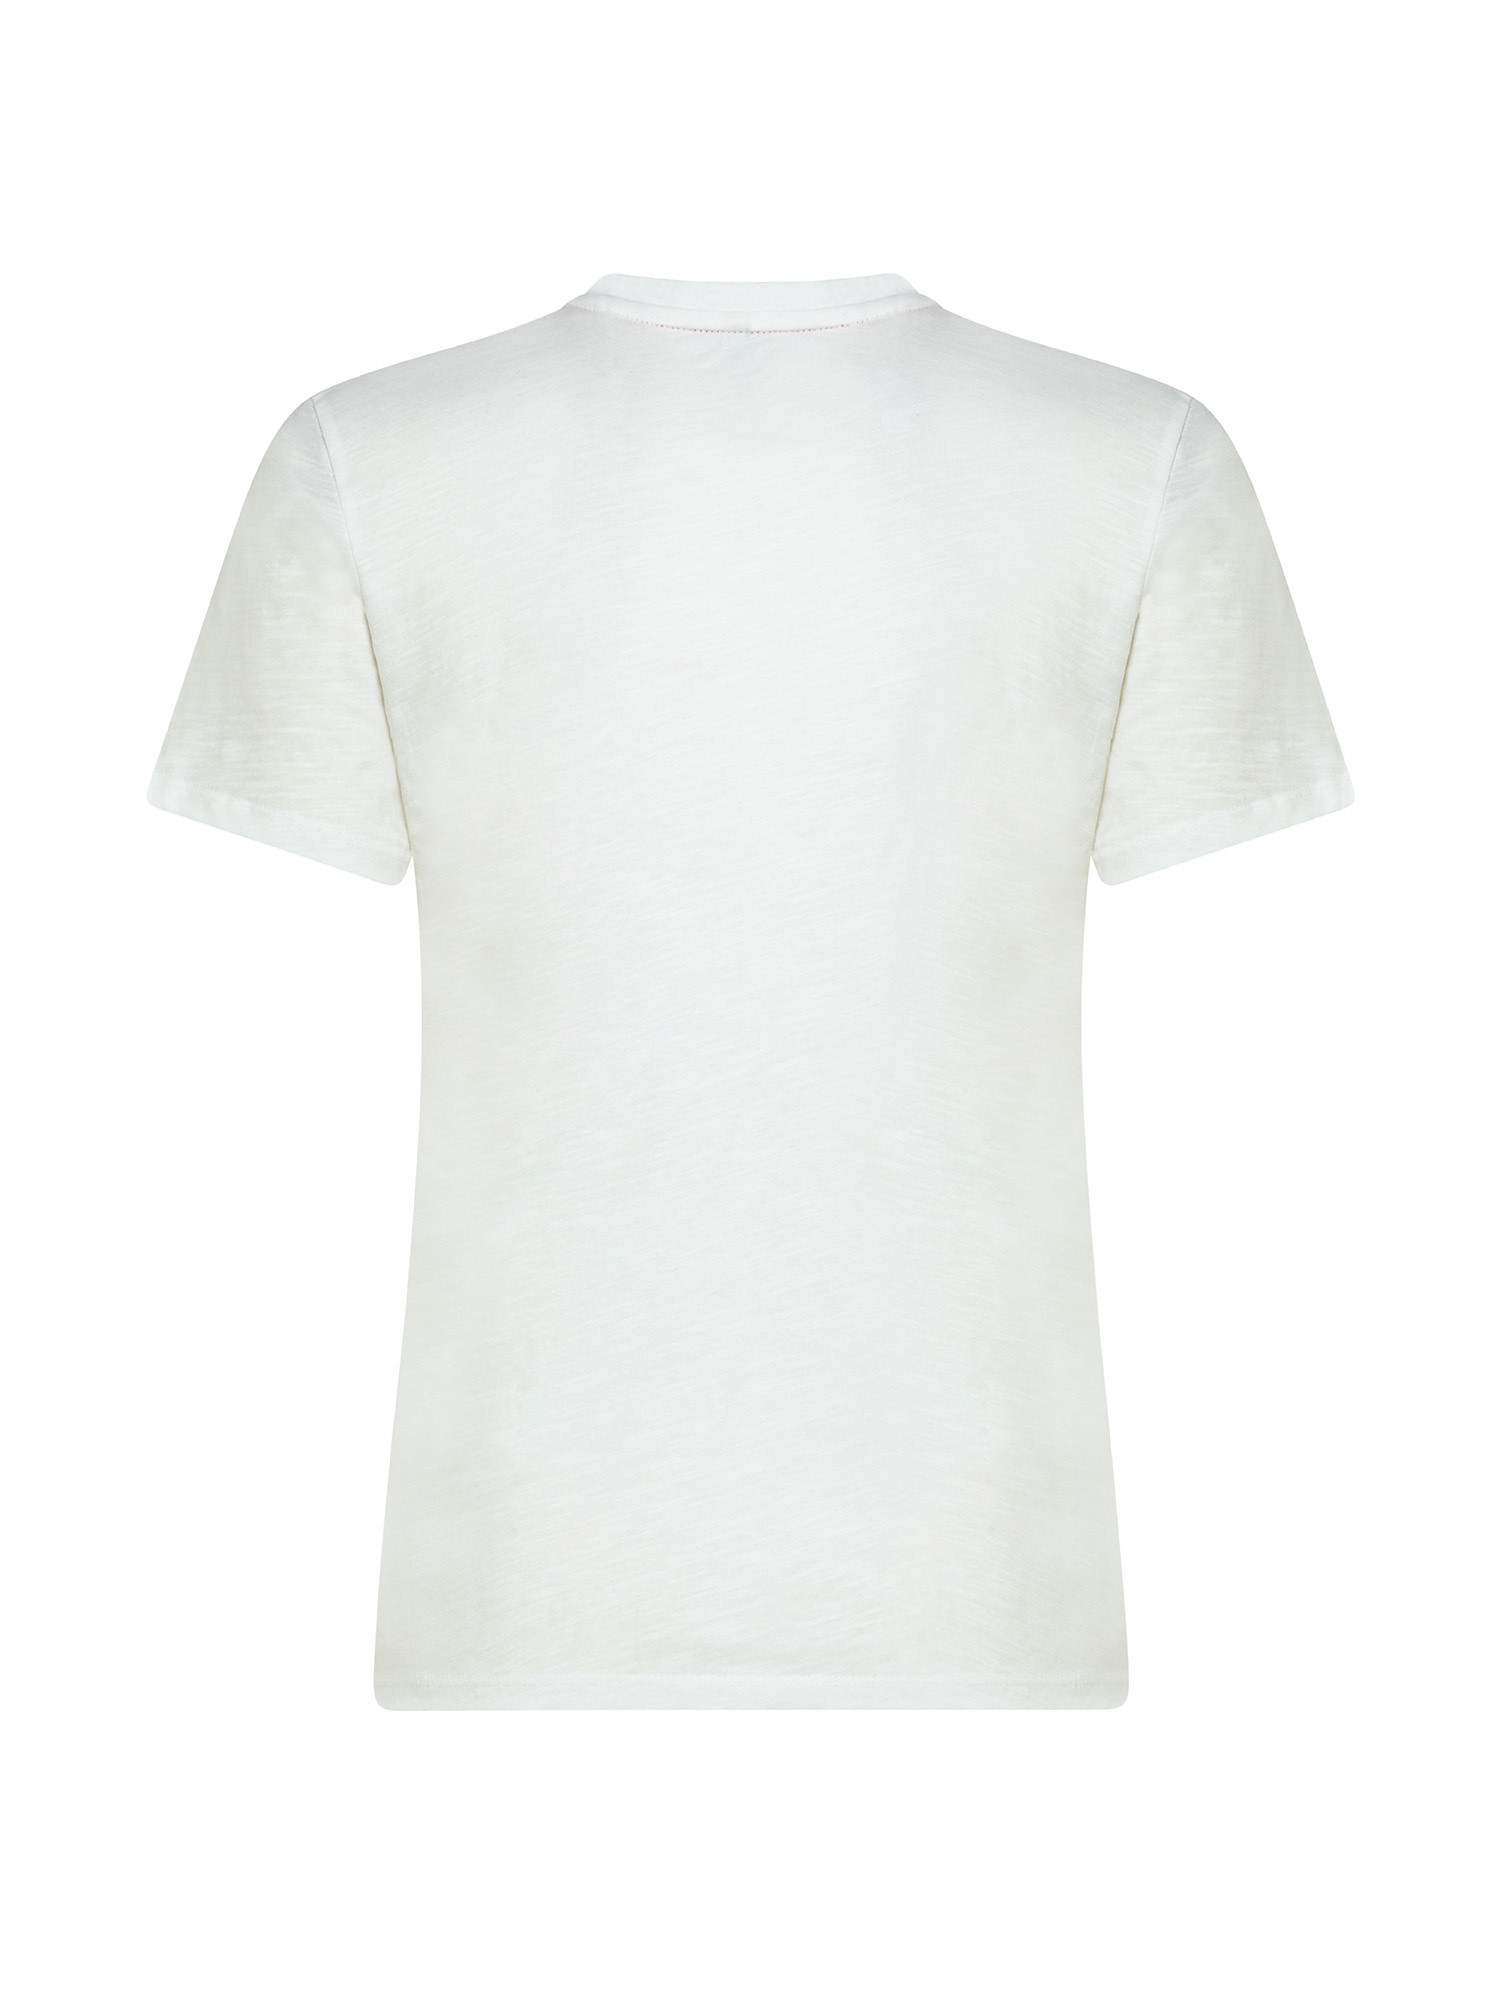 T-shirt con scritta, Bianco, large image number 1